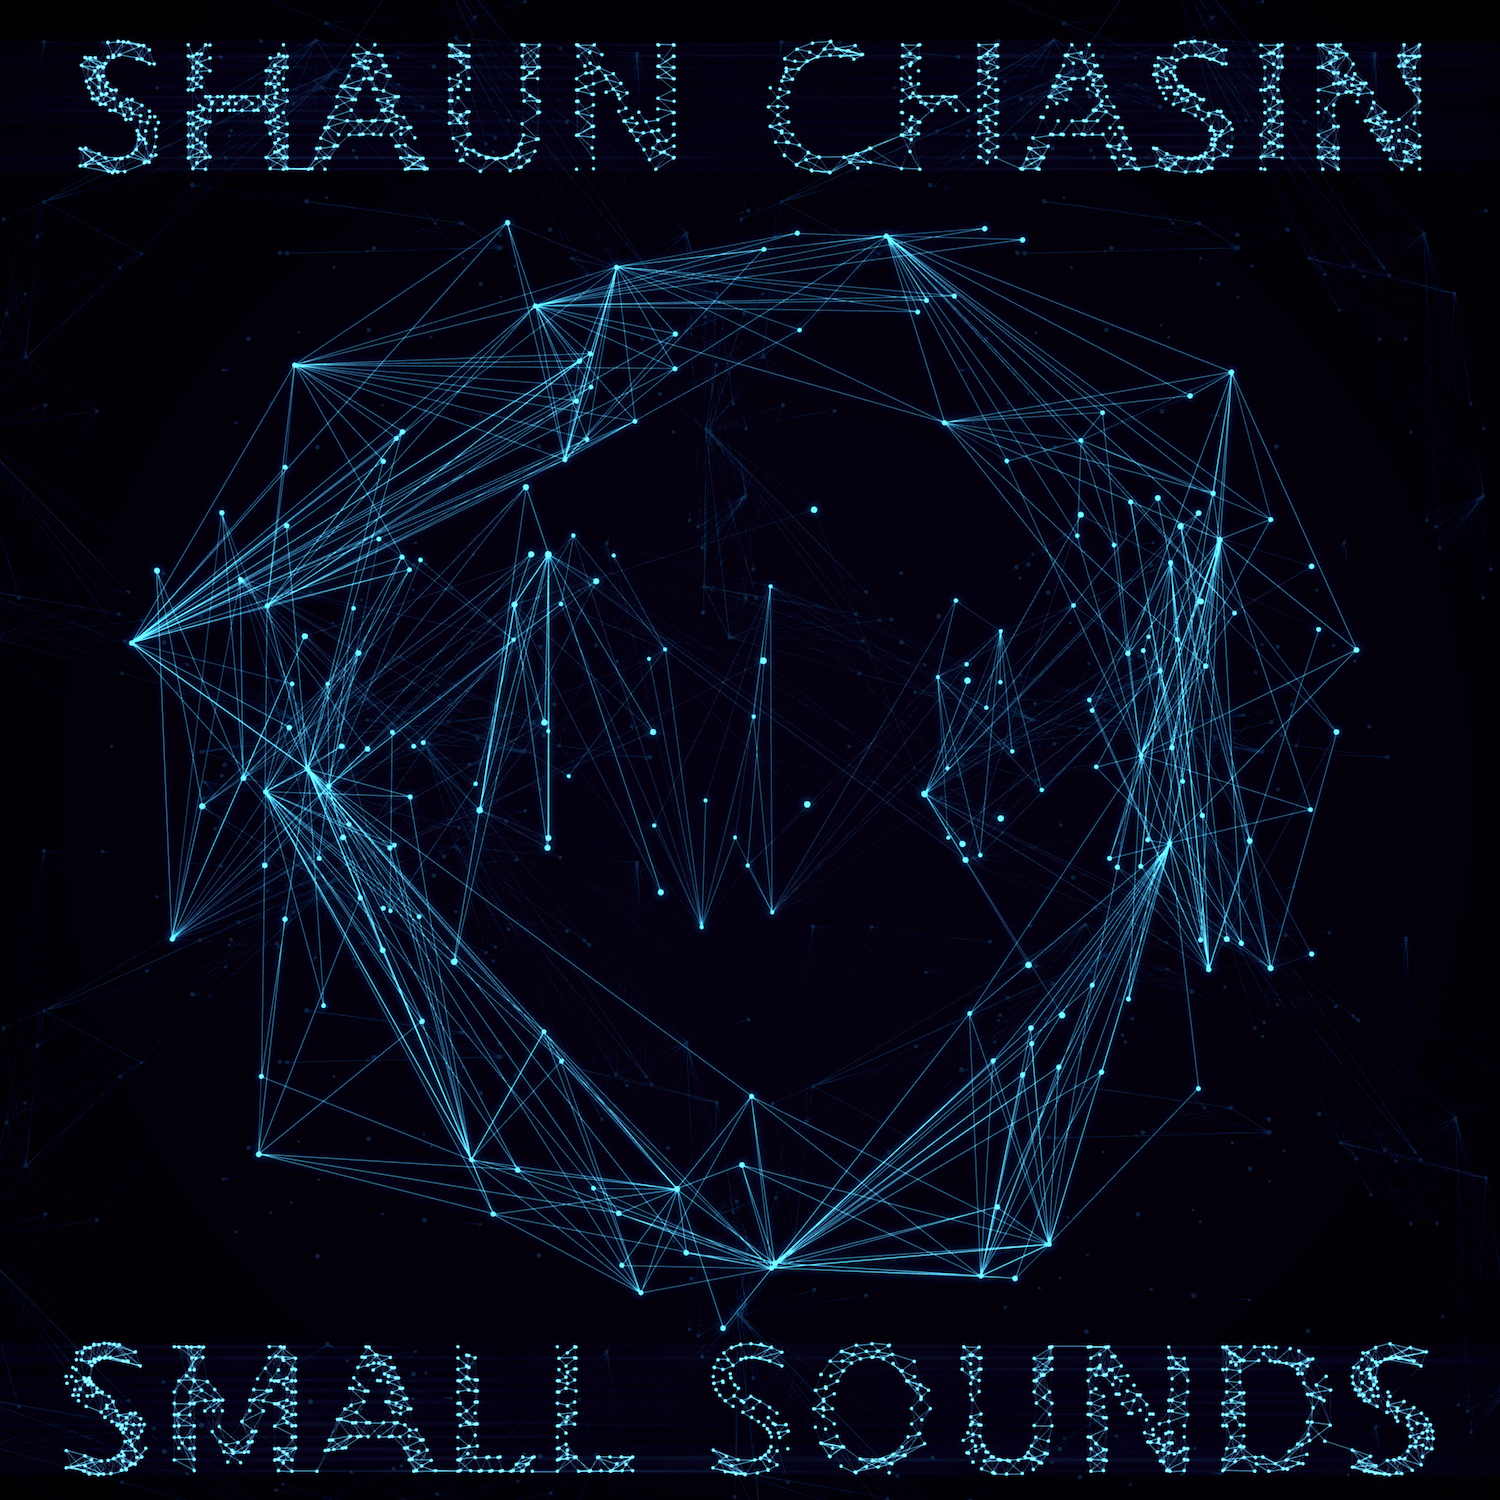 Small Sounds sees digital release